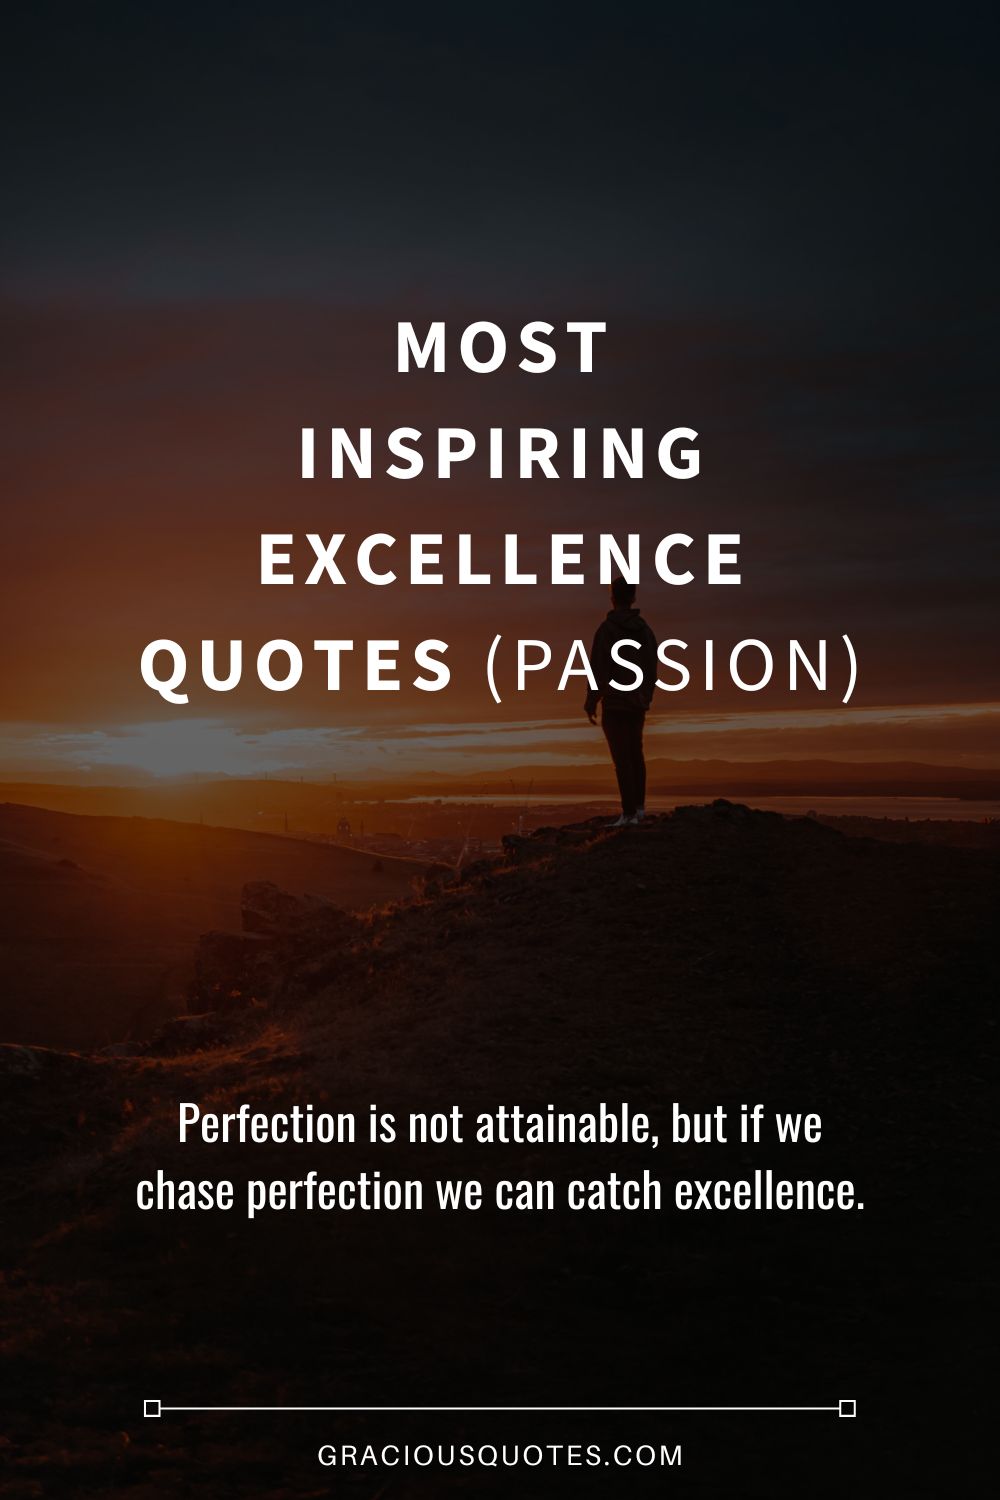 Most Inspiring Excellence Quotes (PASSION) - Gracious Quotes